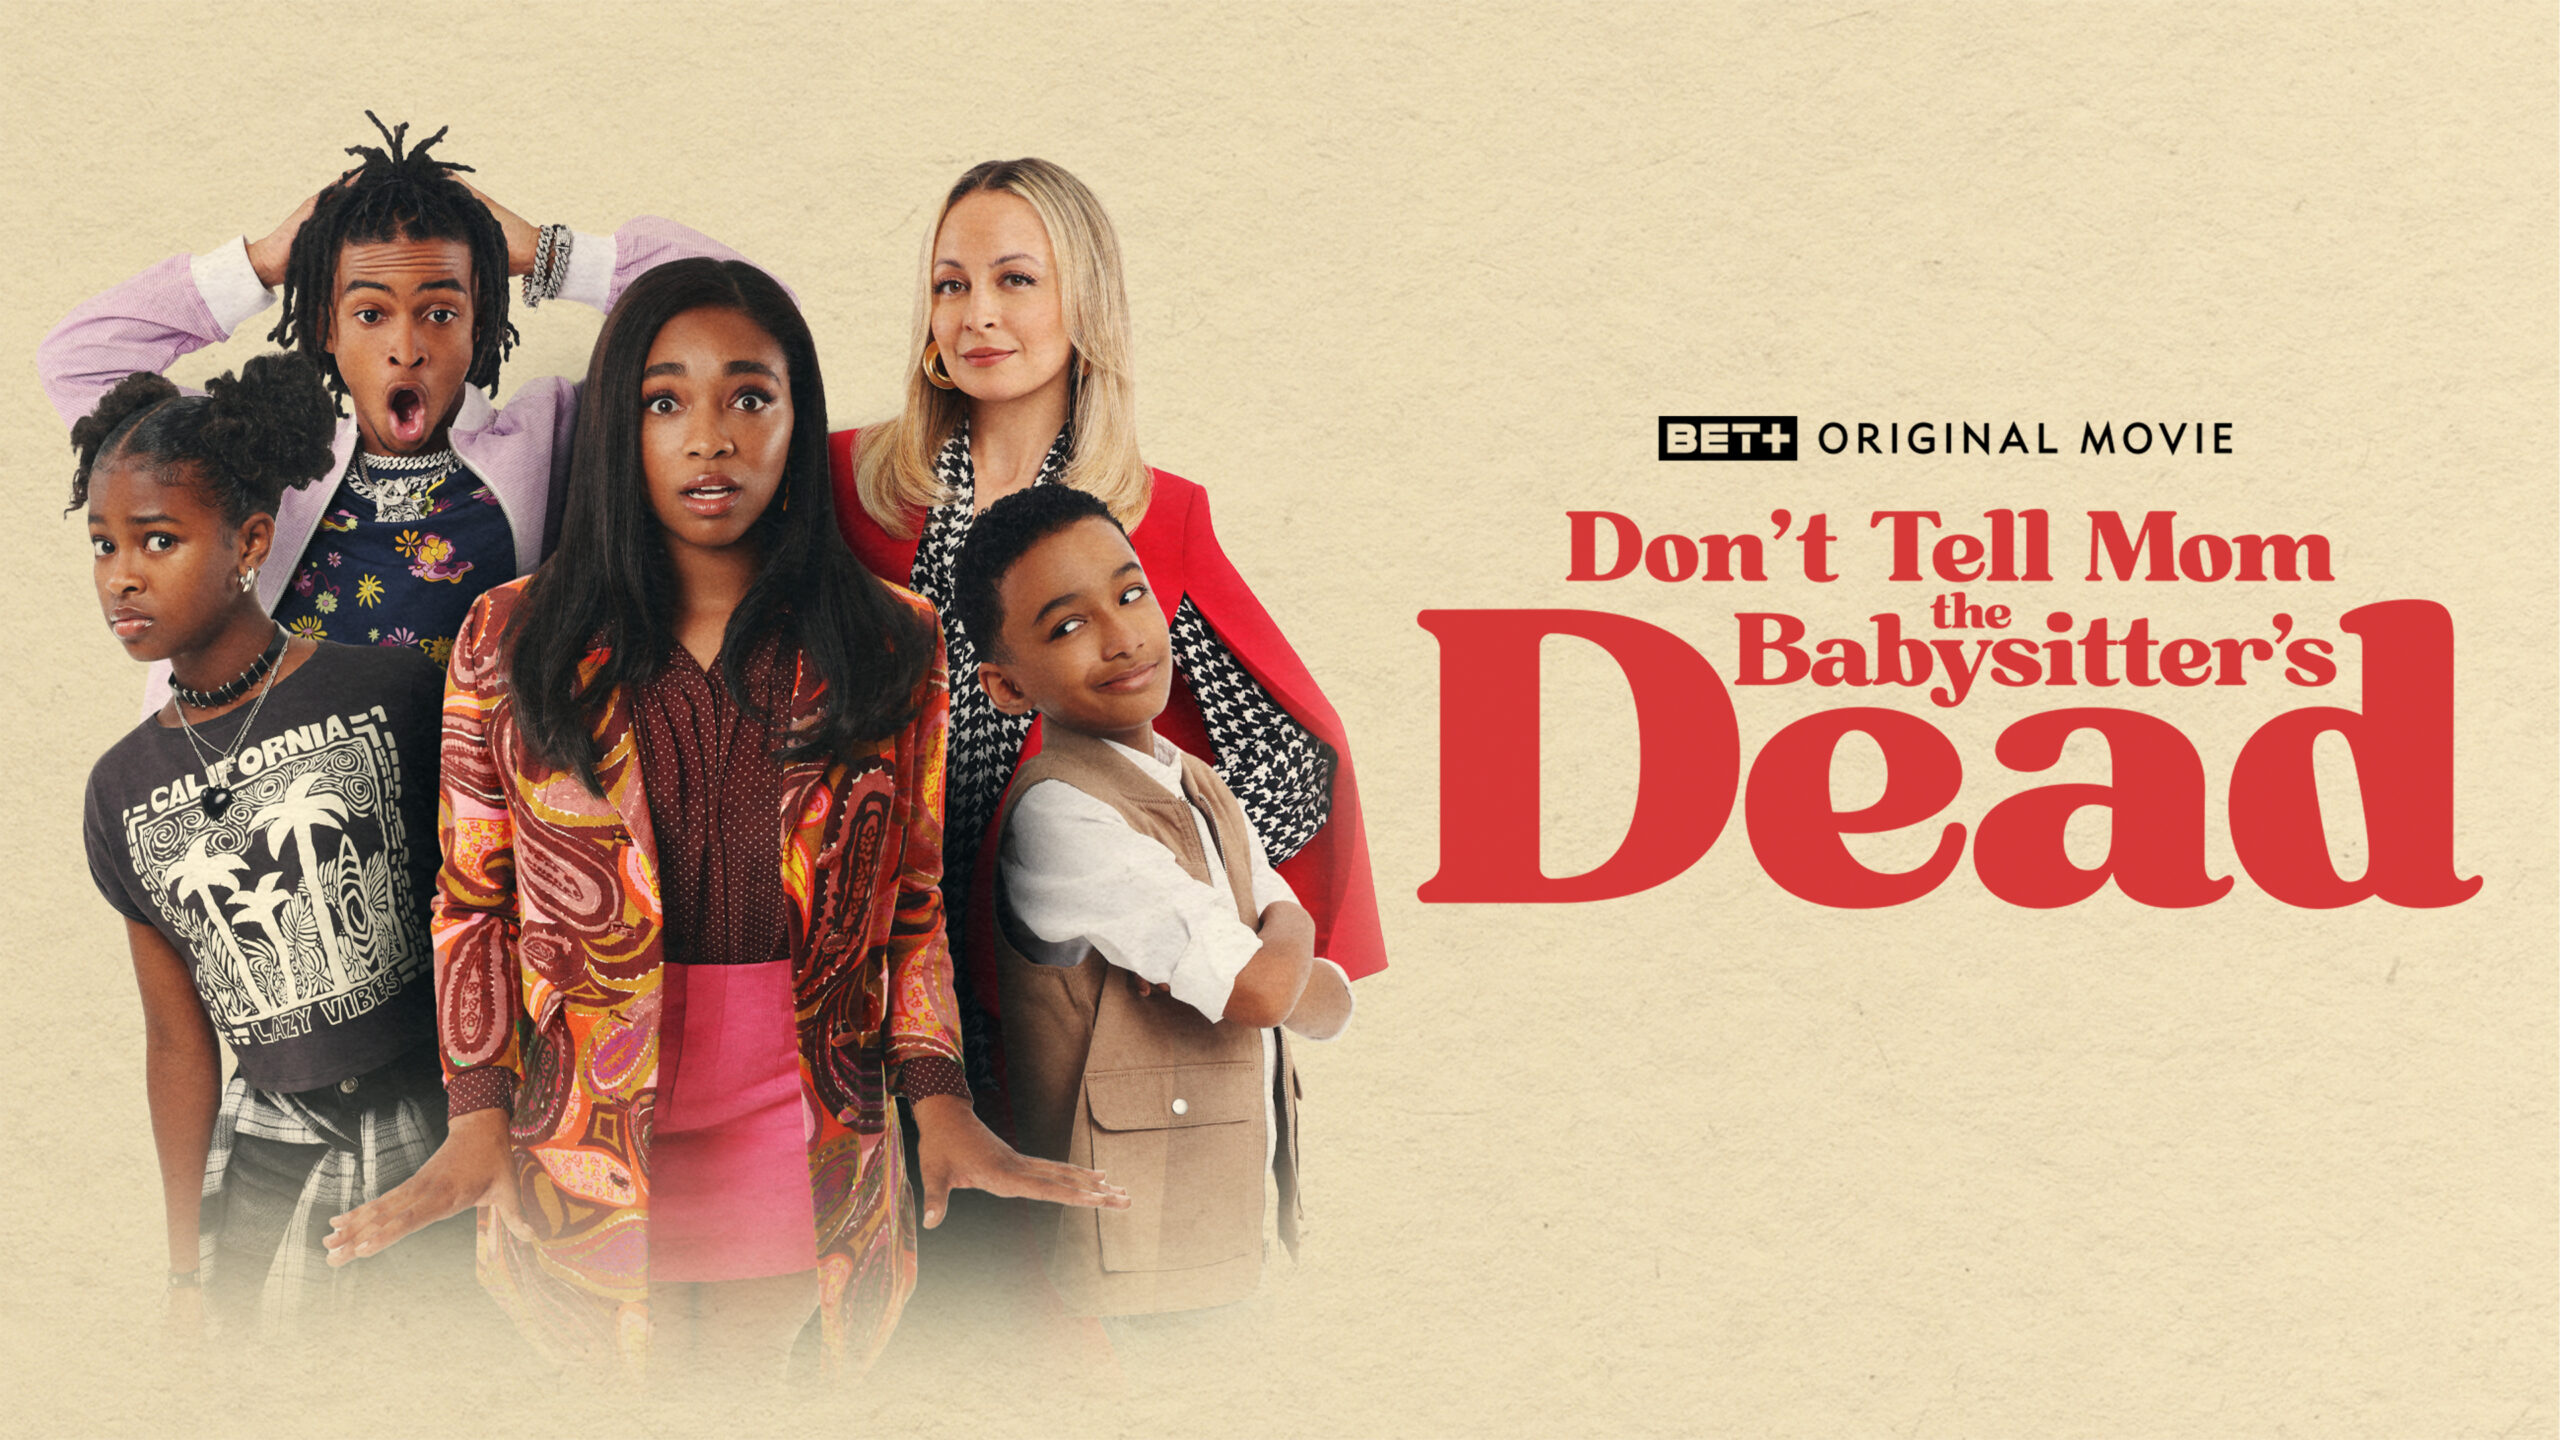 BET+ Original Film, “Don’t Tell Mom The Babysitter’s Dead” To Premiere On May 16